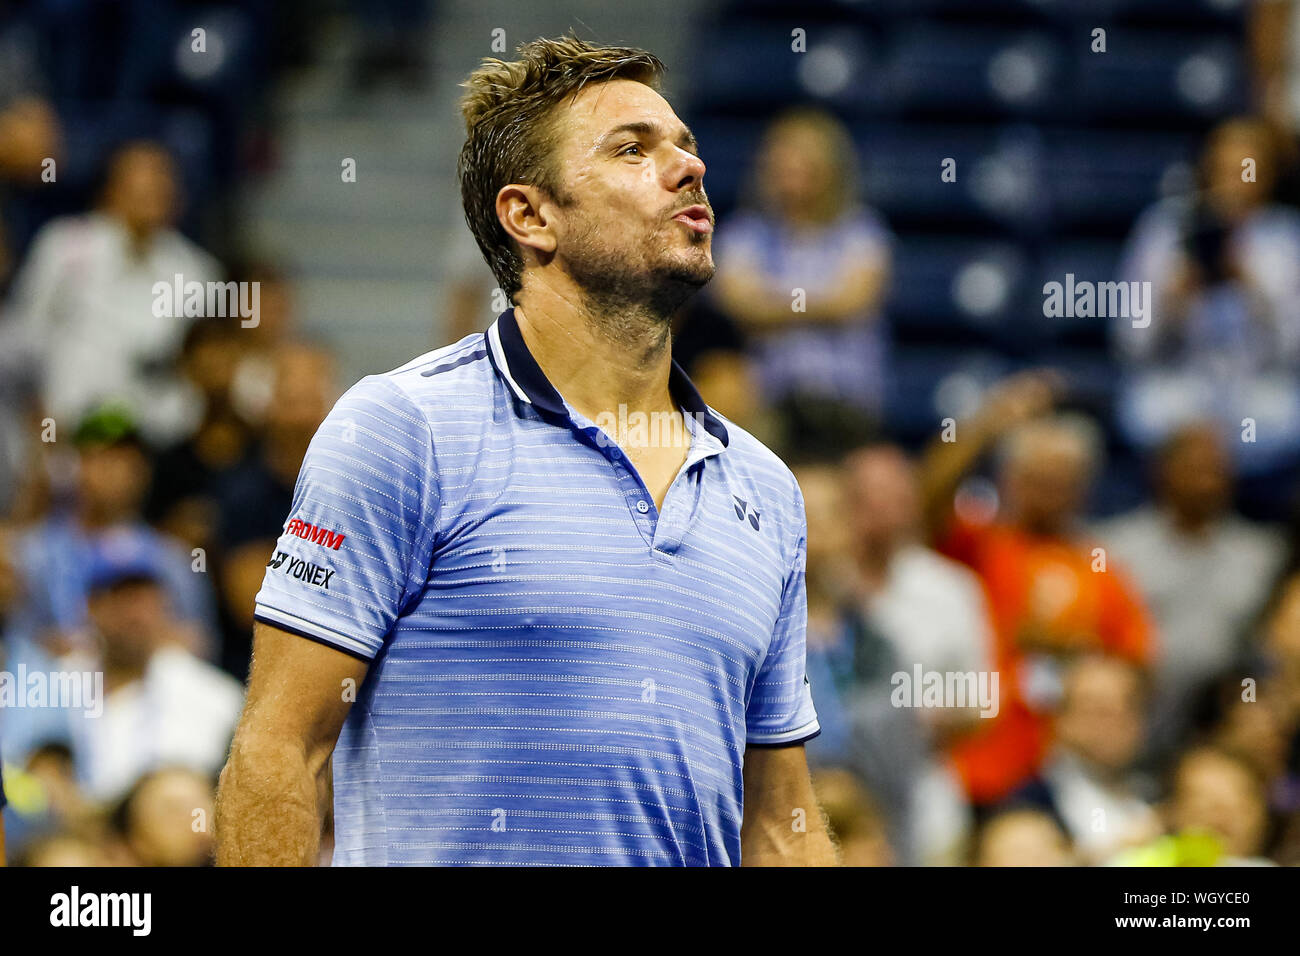 New York, USA. 01st Sep, 2019. Stan Wawrinka of Switzerland reacts during his match against Novak Djokovic of Serbia in the third round on Arthur Ashe Stadium at the USTA Billie Jean King National Tennis Center on September 01, 2019 in New York City. Credit: Independent Photo Agency/Alamy Live News Stock Photo